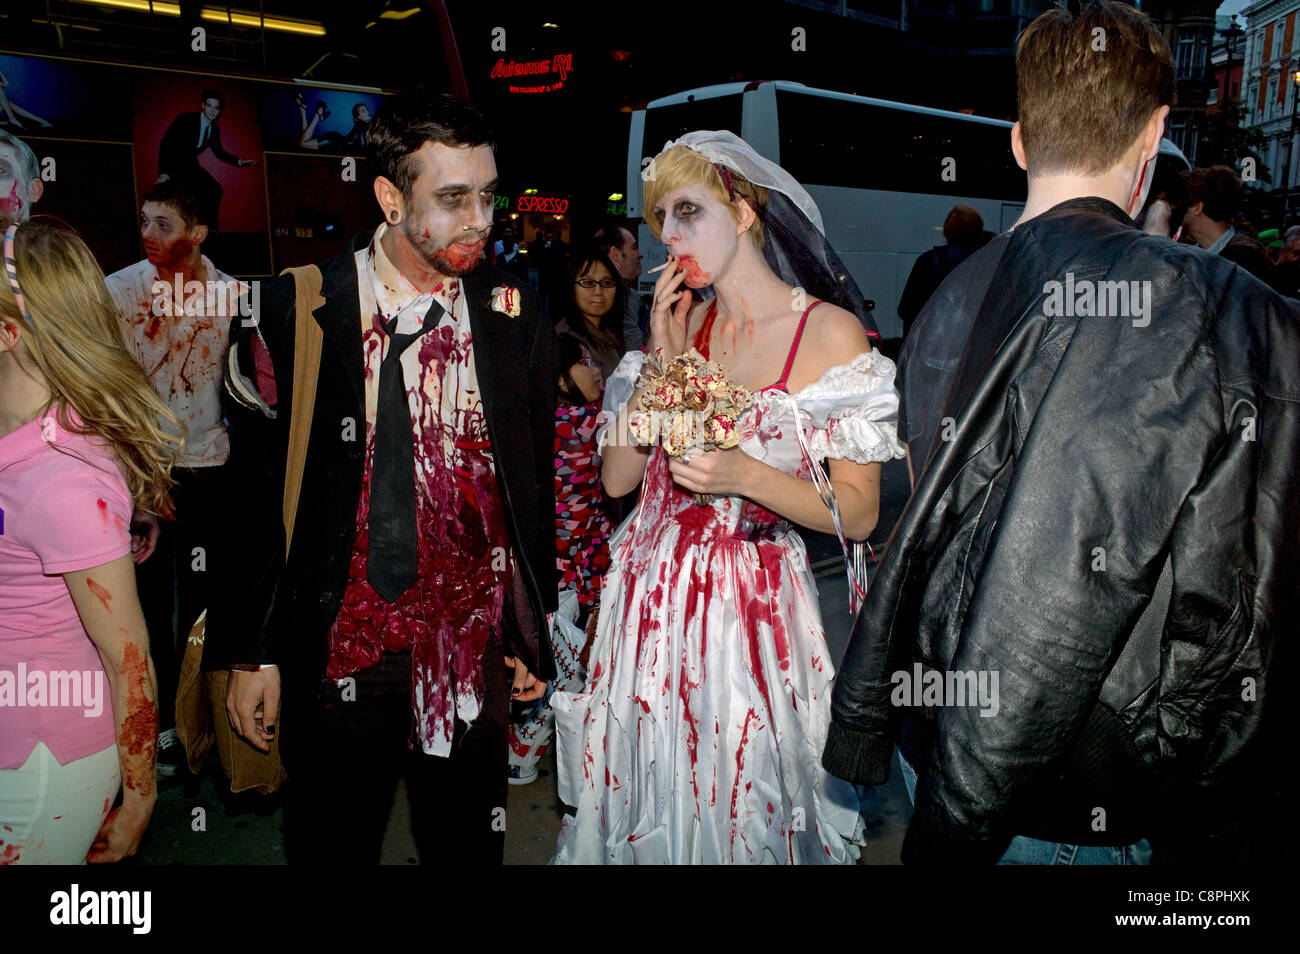 A Zombie Bride And Groom Posing During A Halloween Pub Crawl Stock